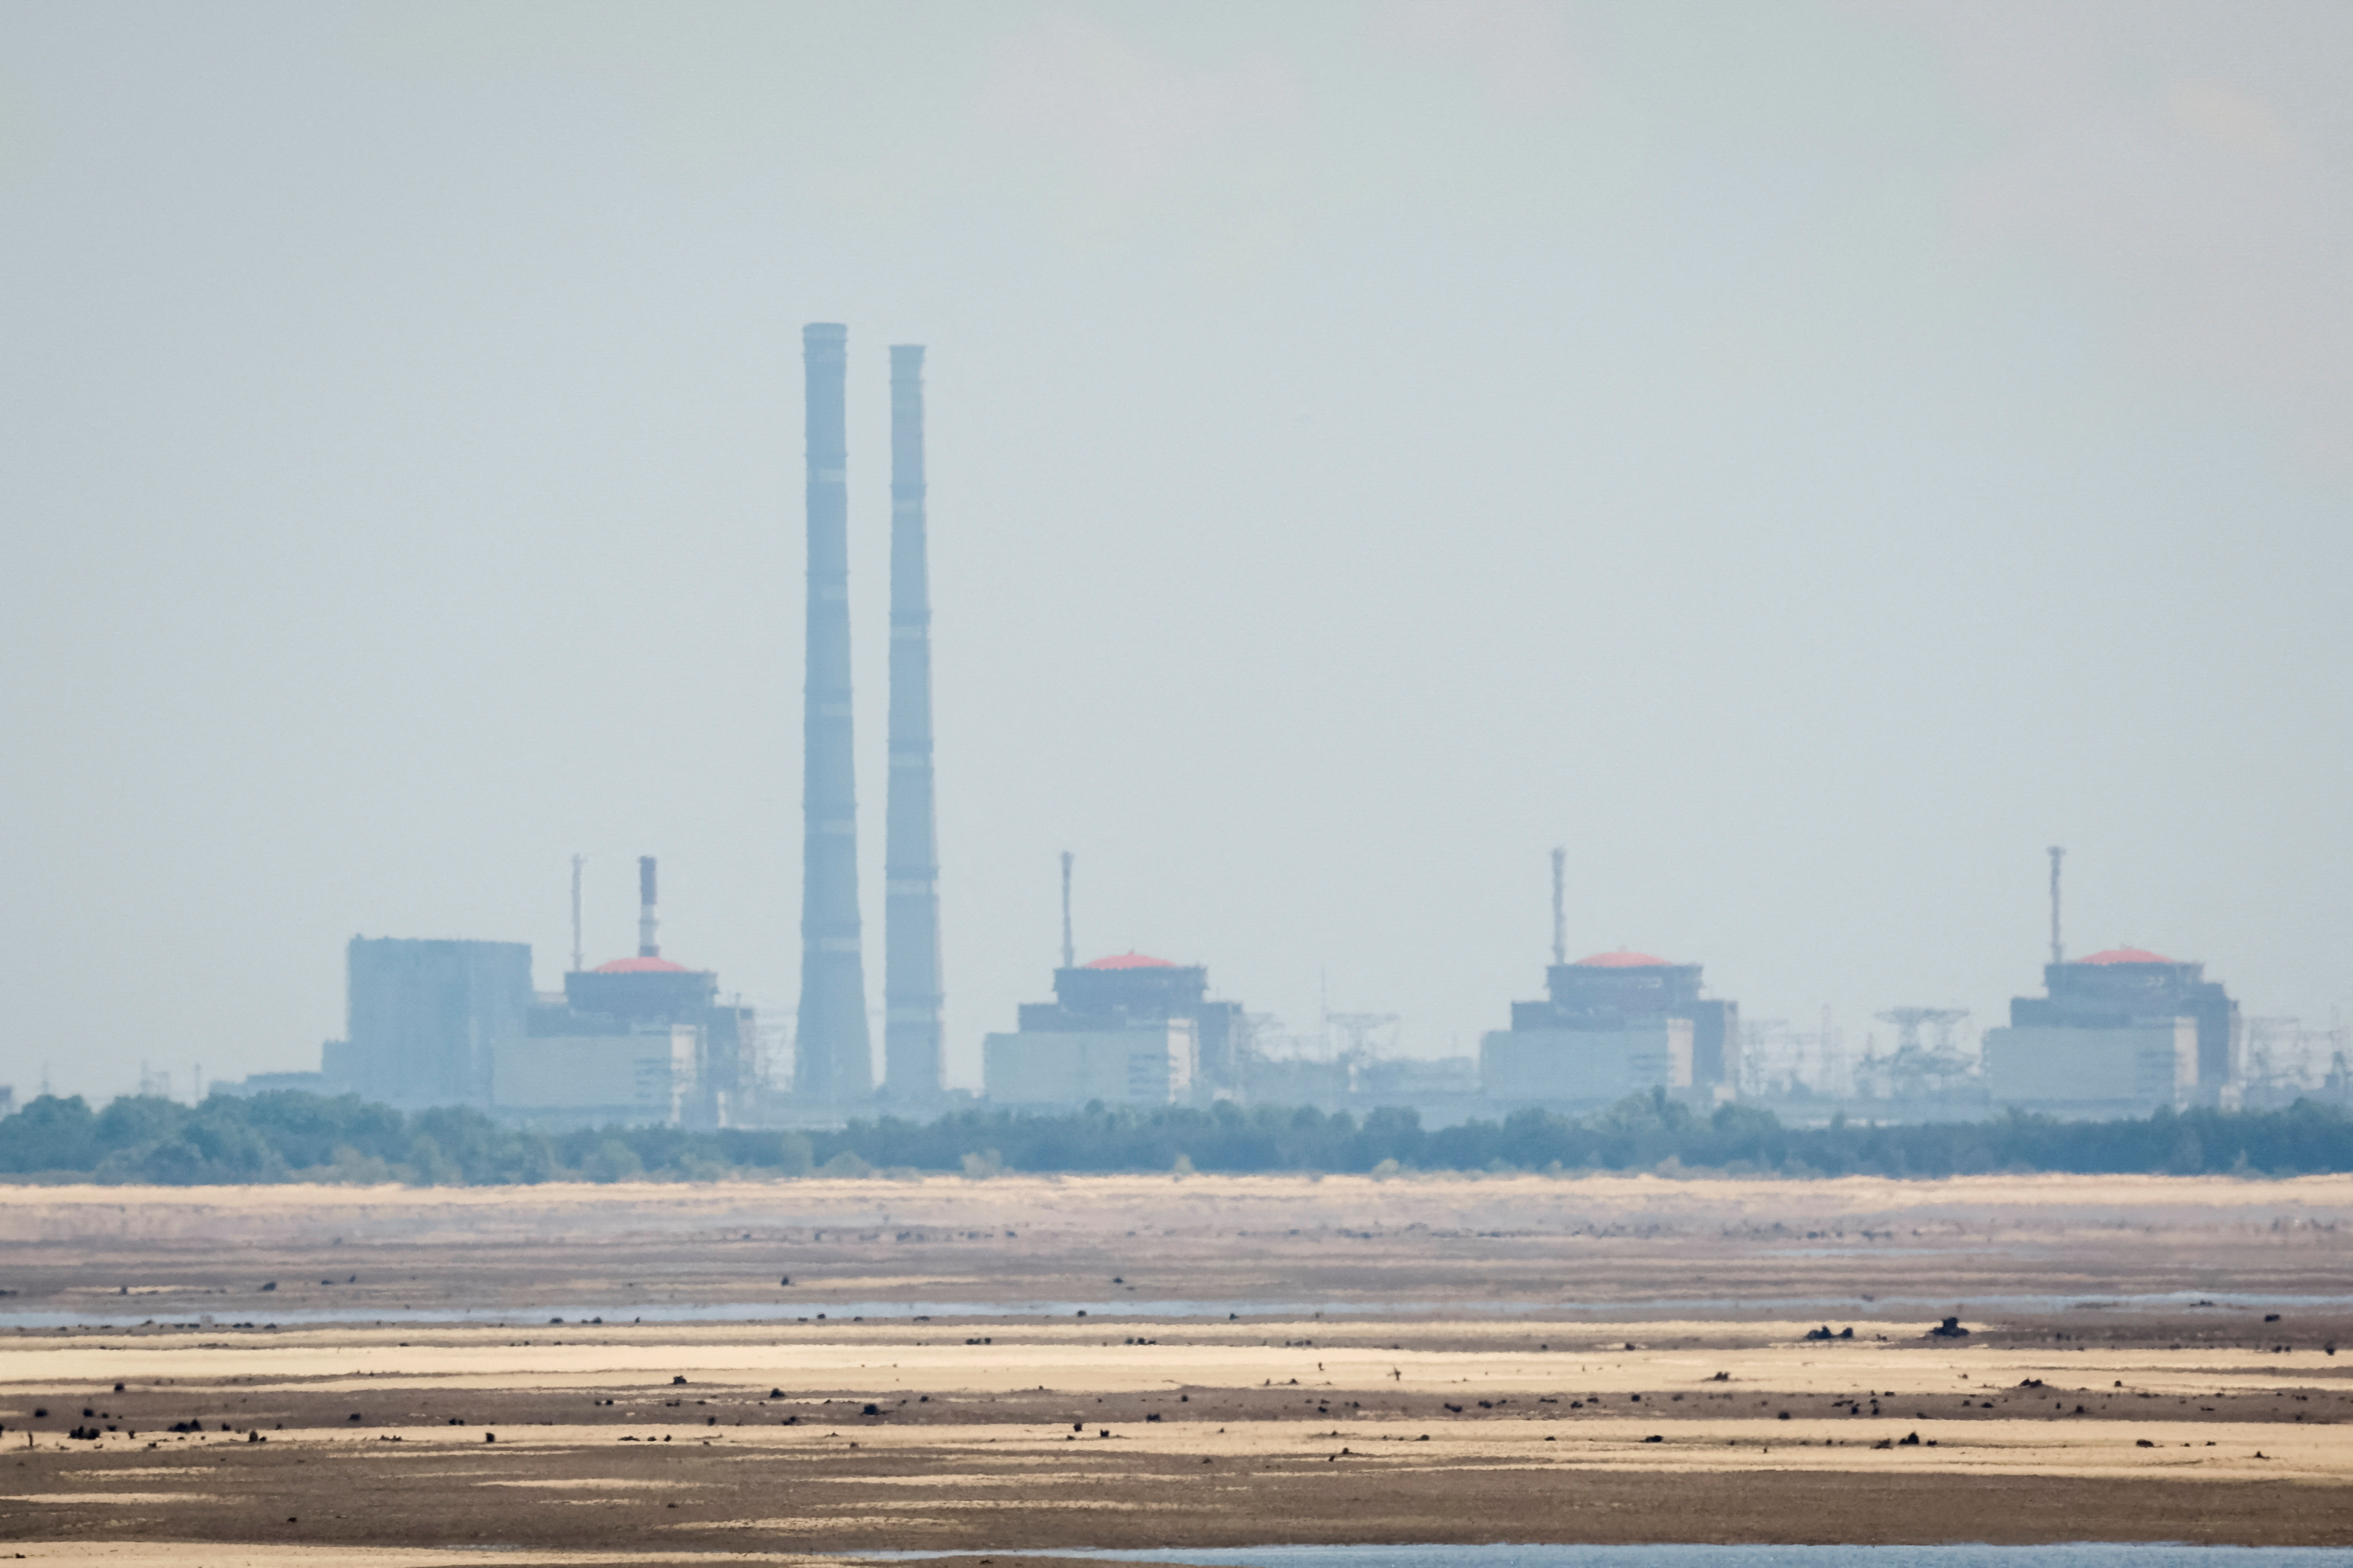 View shows Zaporizhzhia Nuclear Power Plant from the bank of Kakhovka Reservoir in Nikopol